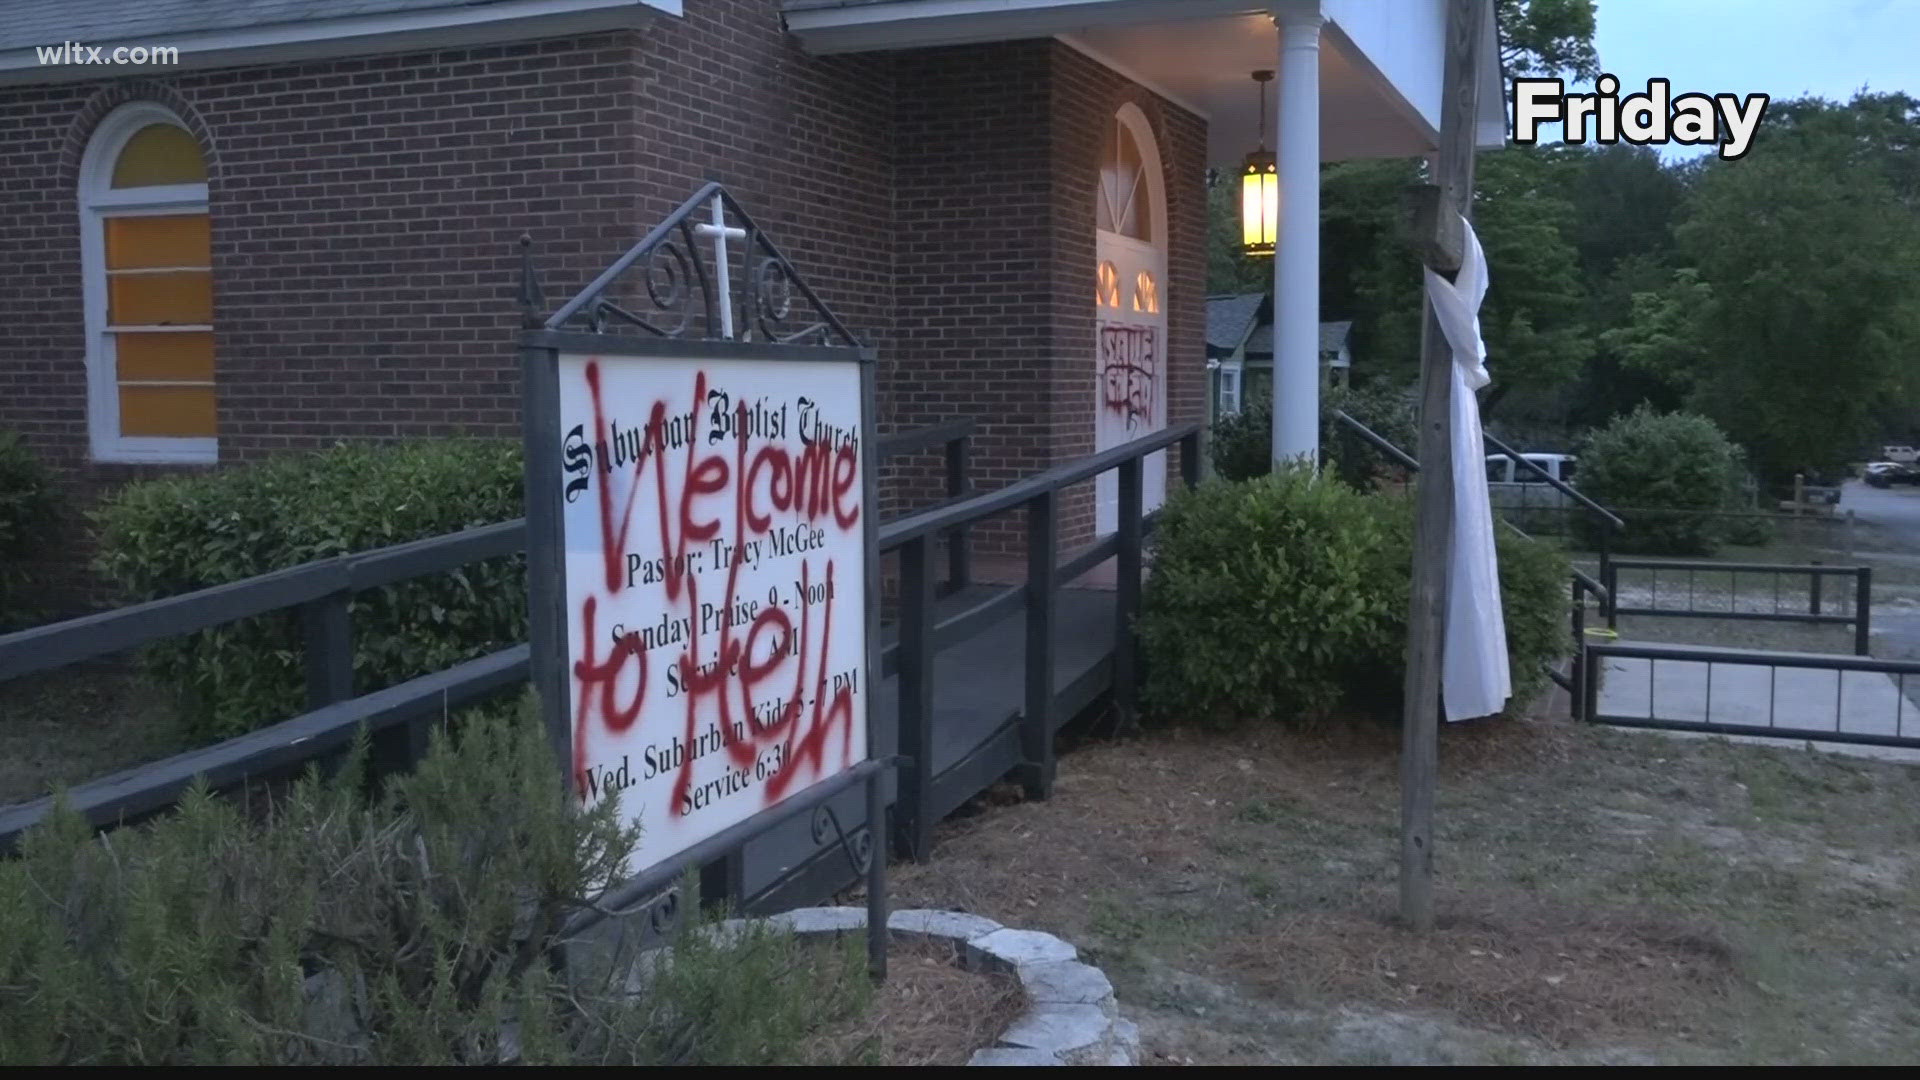 The Suburban Baptist church on Holland drive in West Columbia was spray painted Friday, just one of a string of vandalism around town.